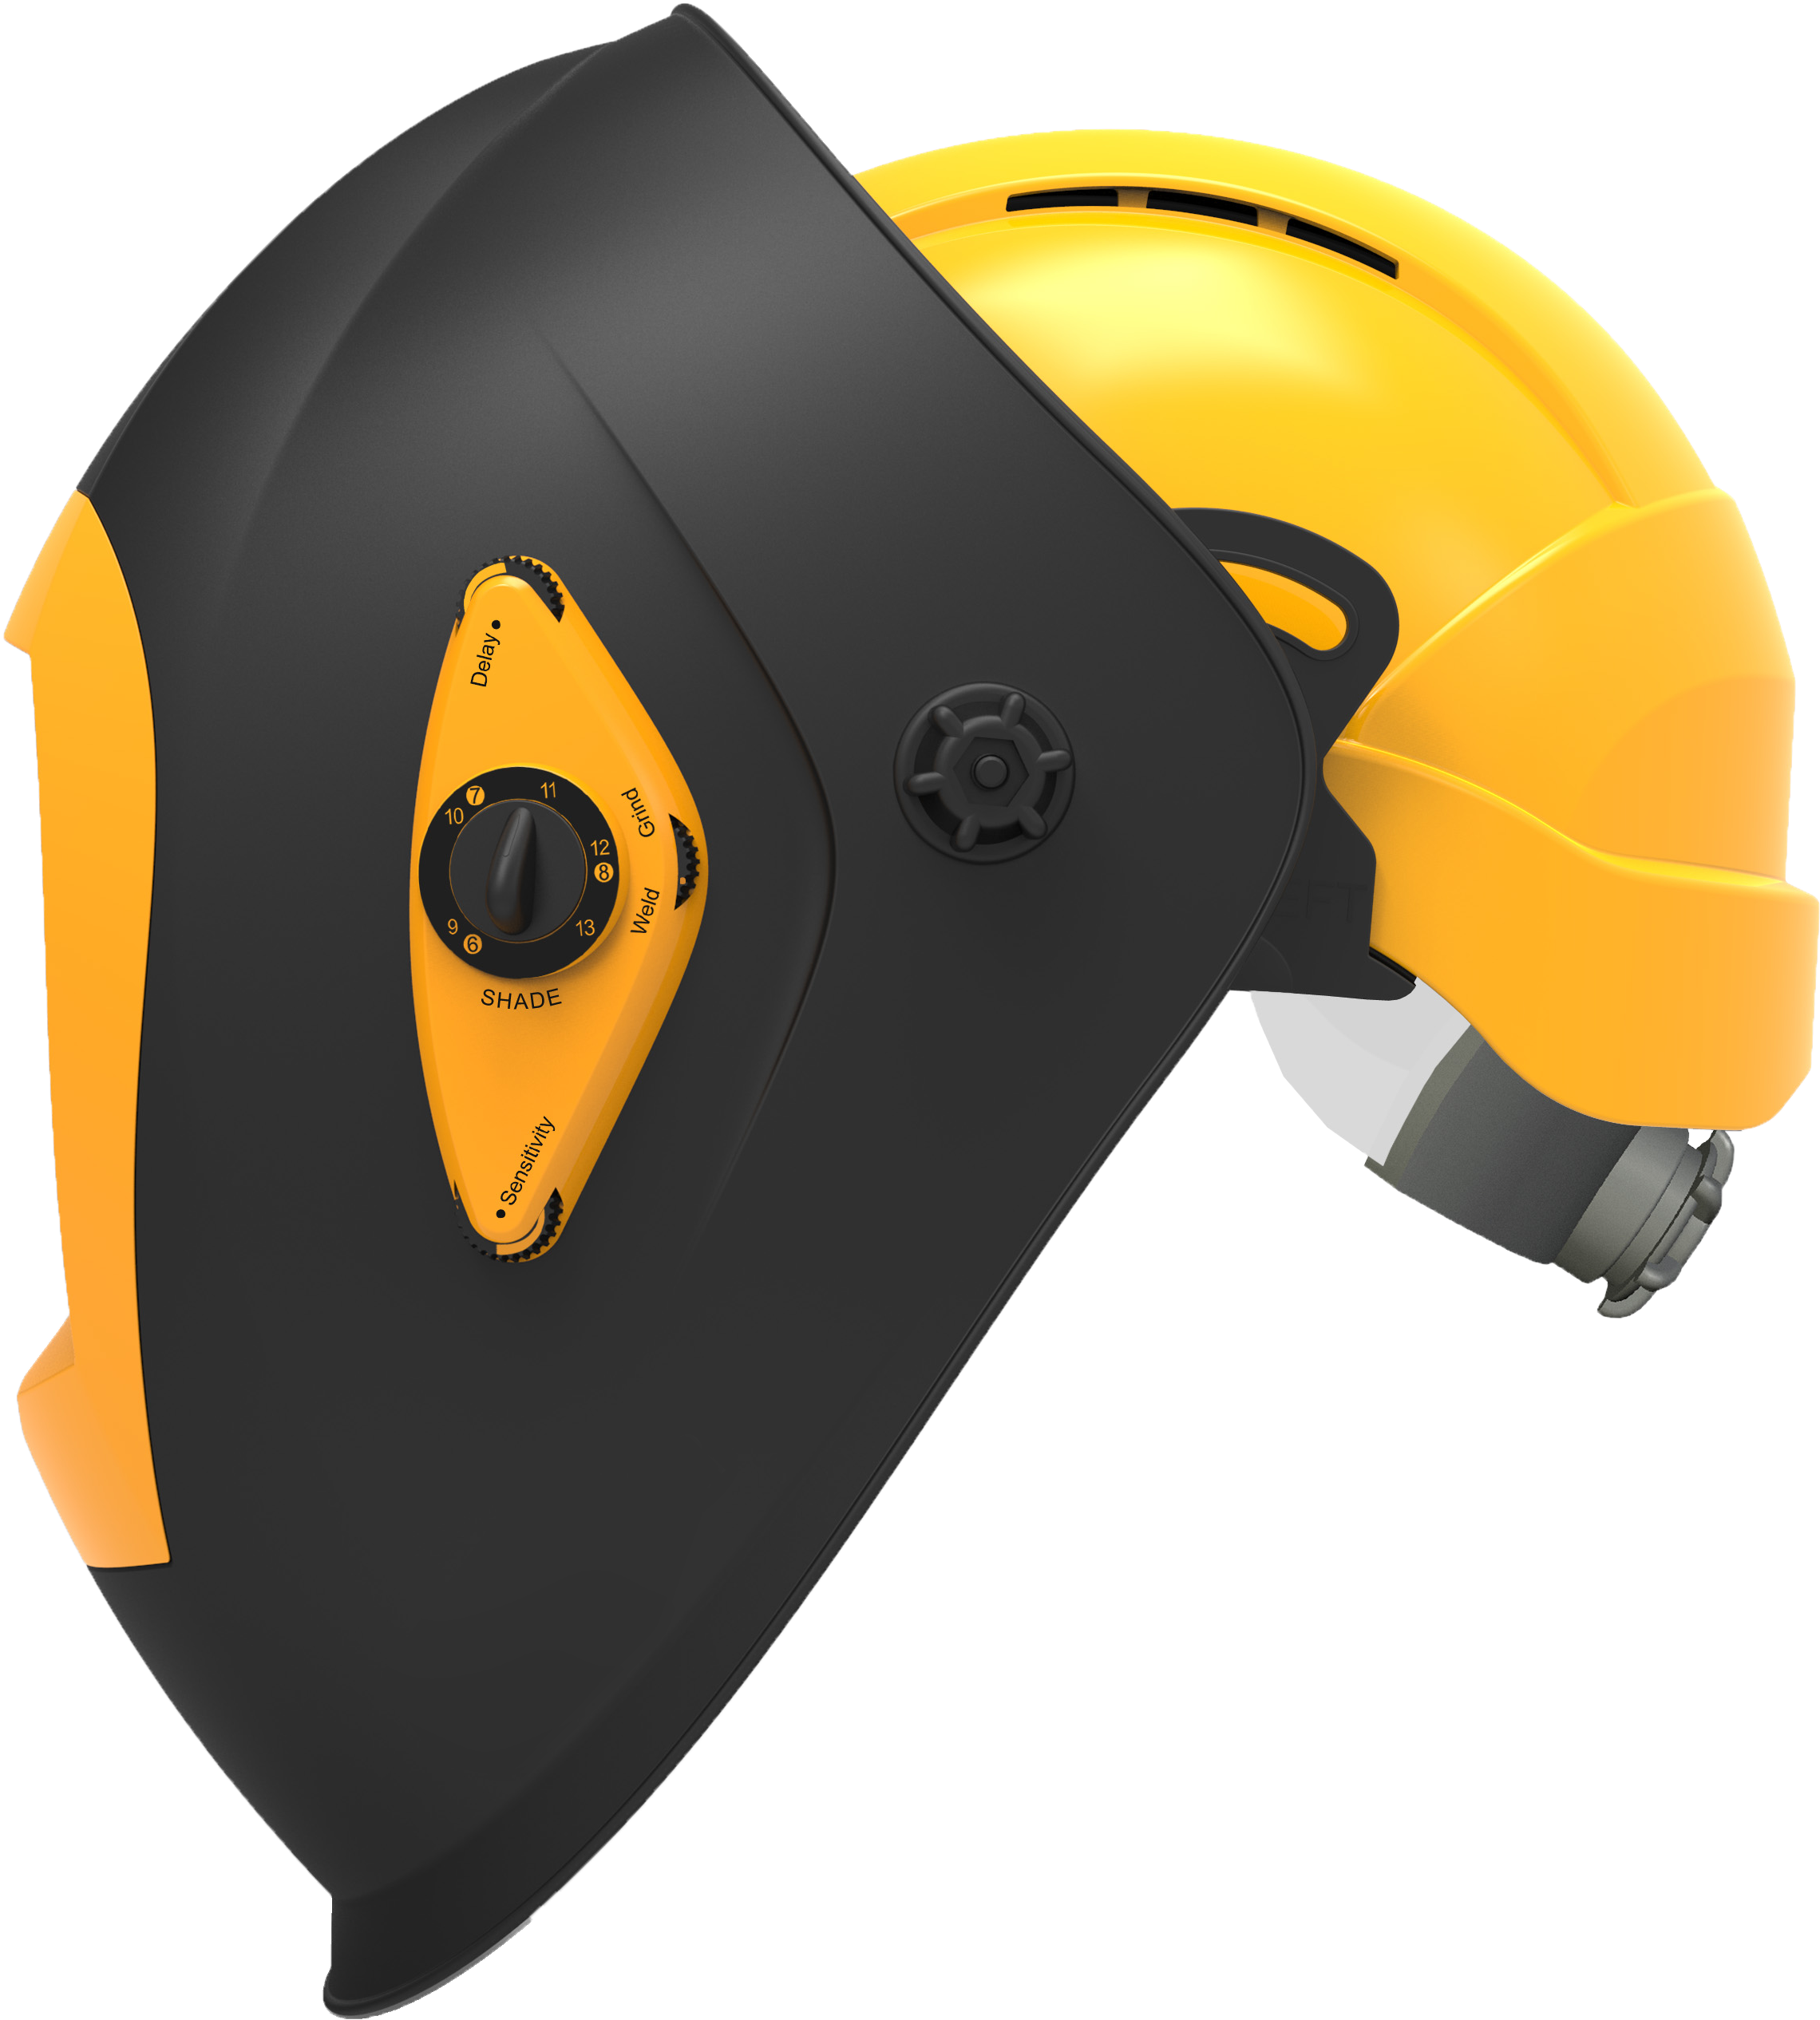 Wh70 Gds Hard Hat - Helmet With Welding Mask (2621x2825)